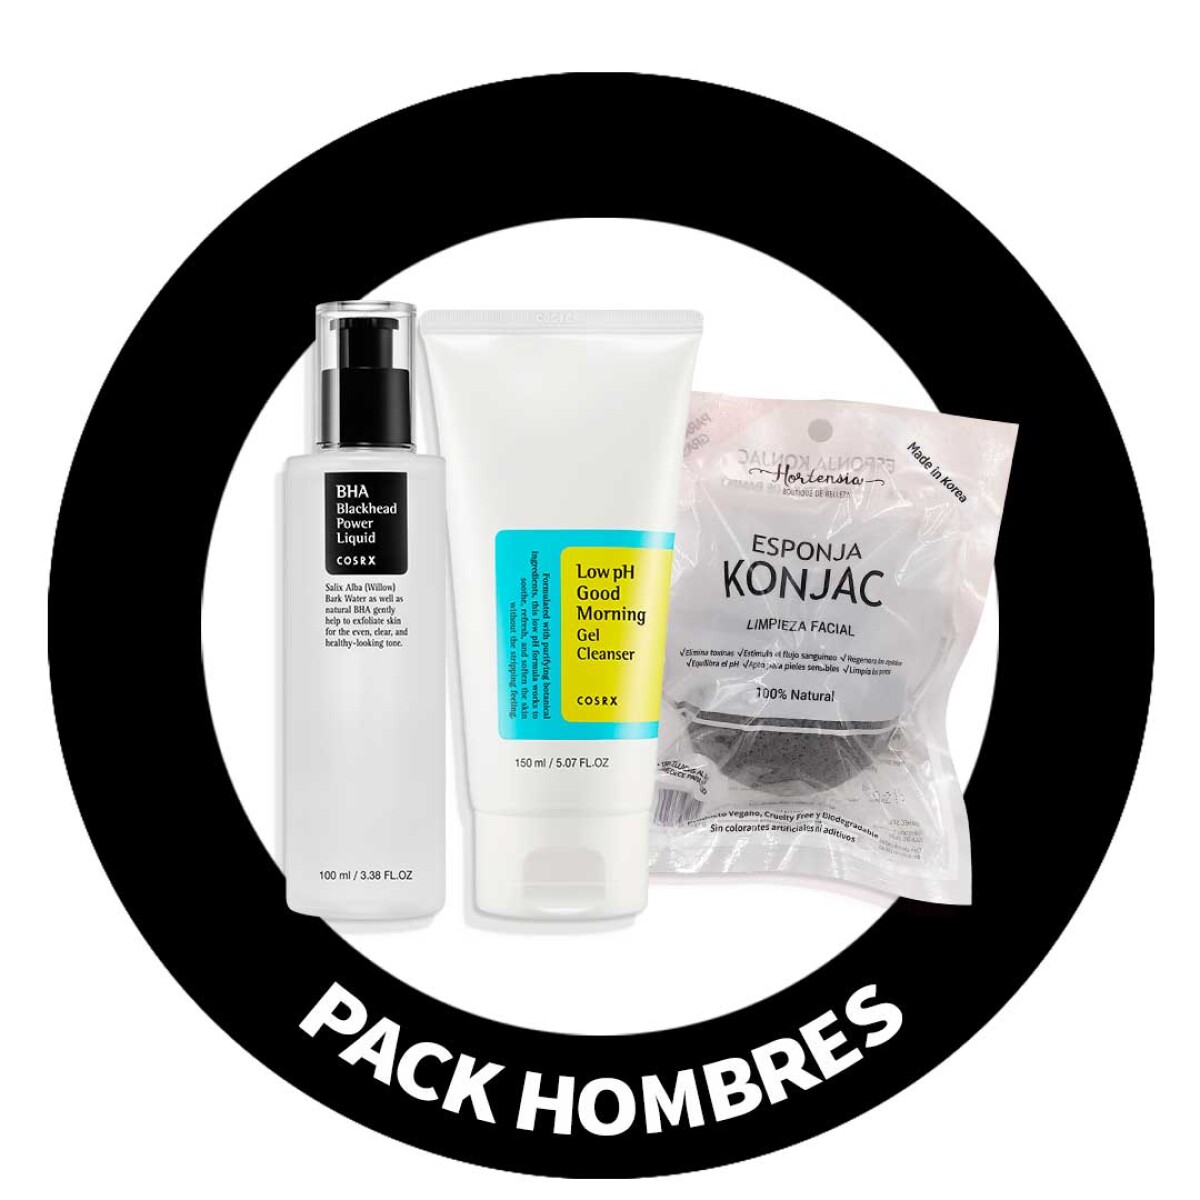 PACK HOMBRES 